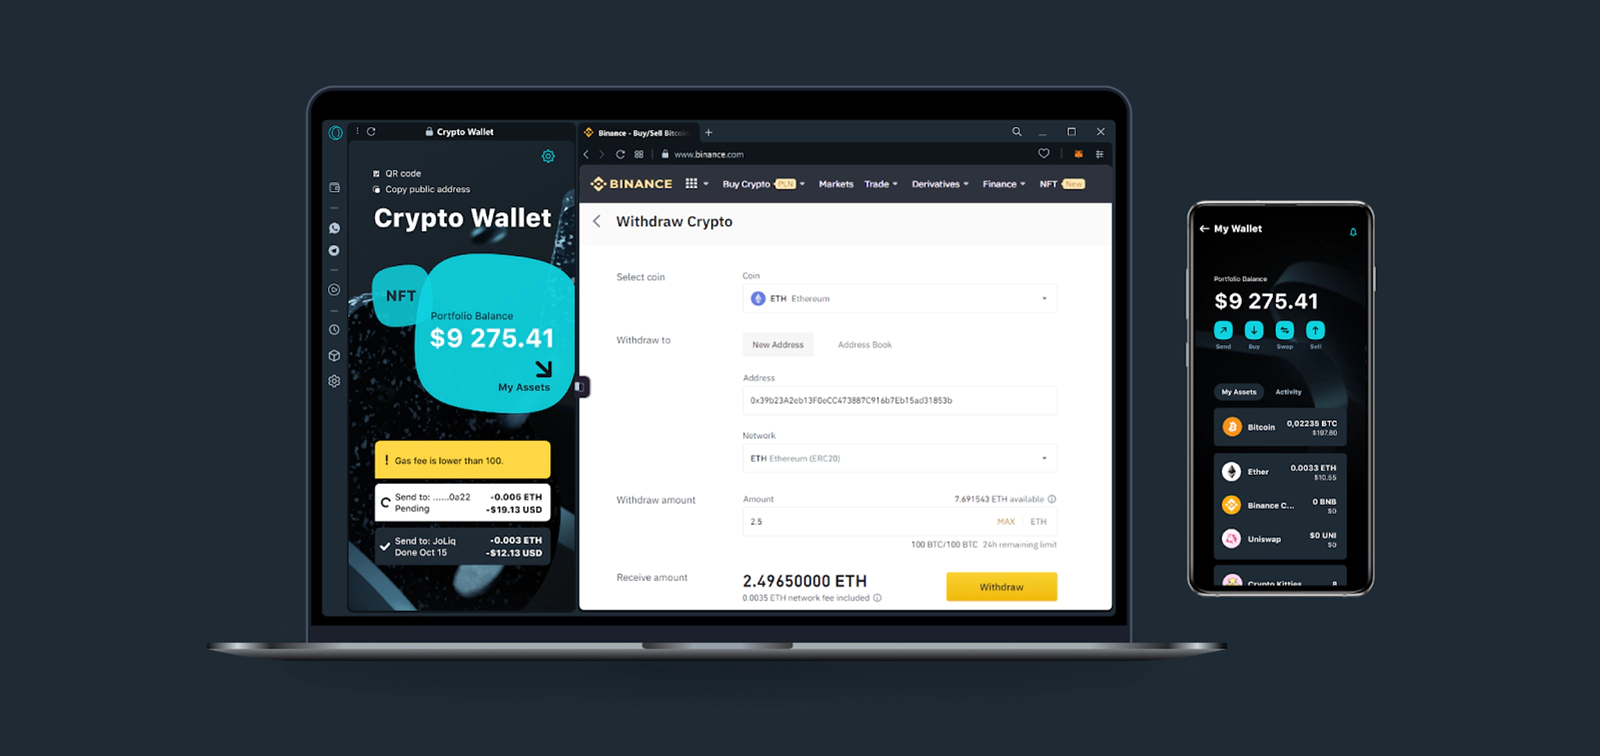 The Crypto Browser comes equipped with a cryptocurrency wallet